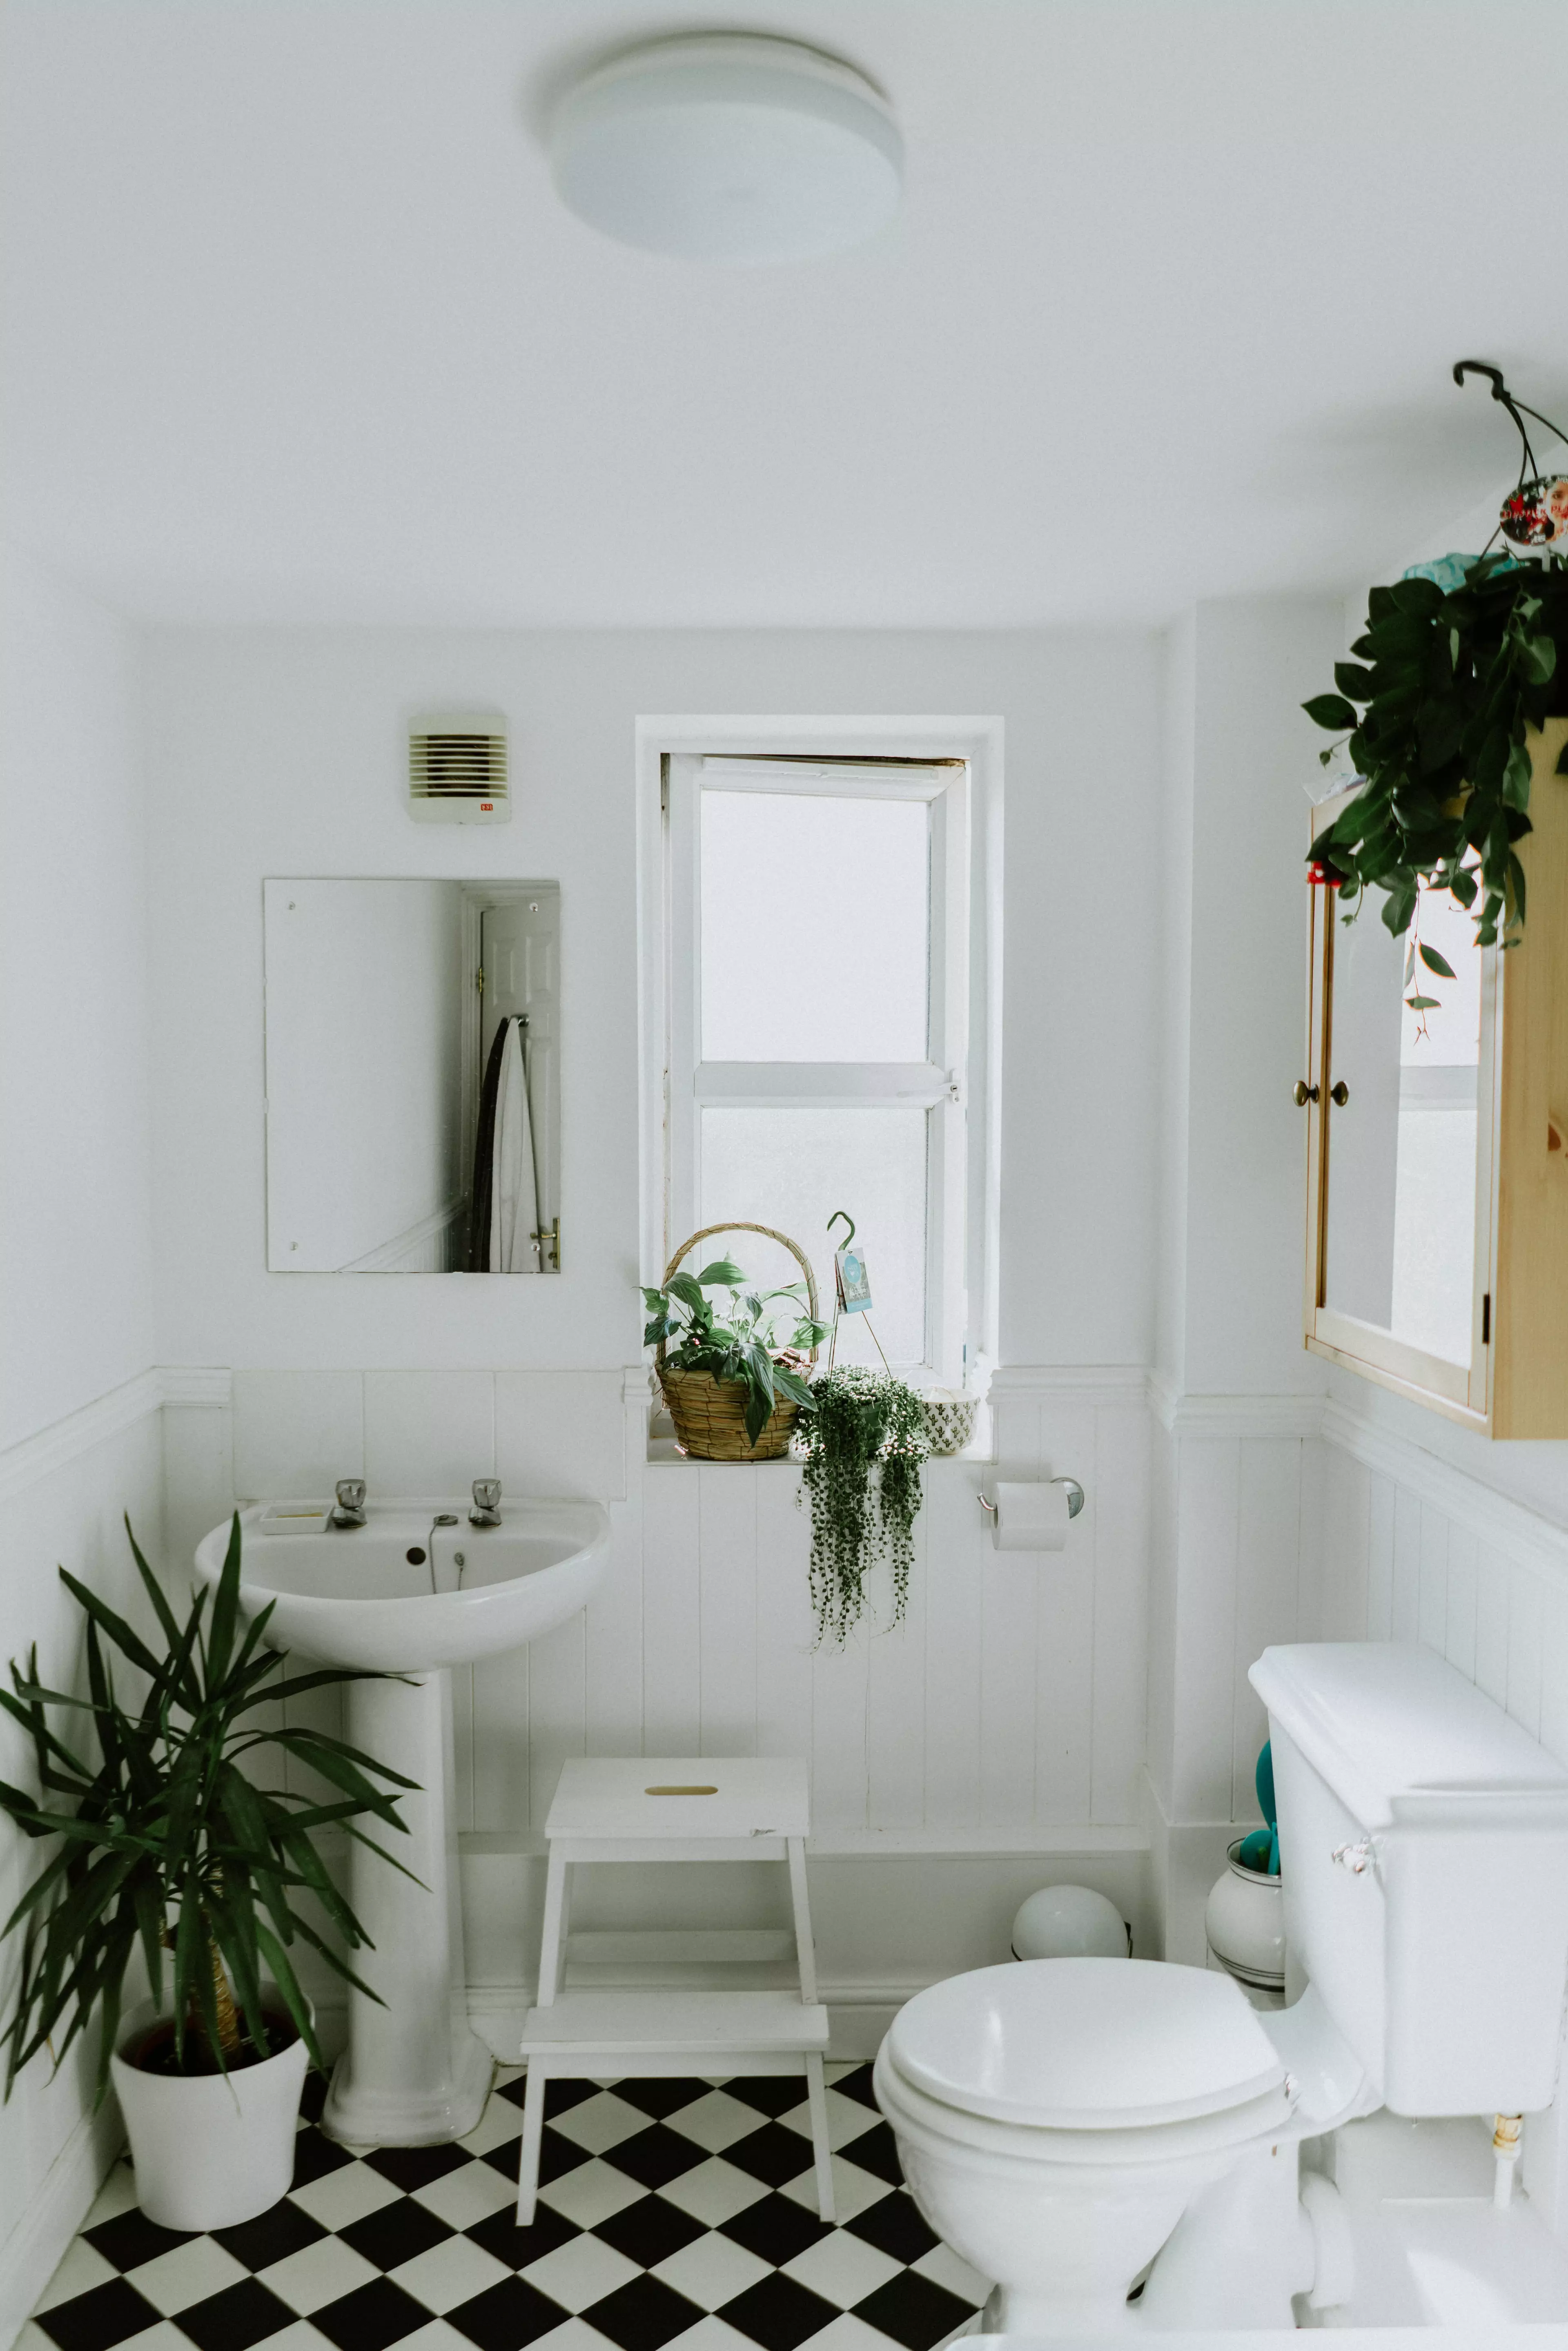 Goodbye splashes and stains, hello sparkling clean bathroom! (